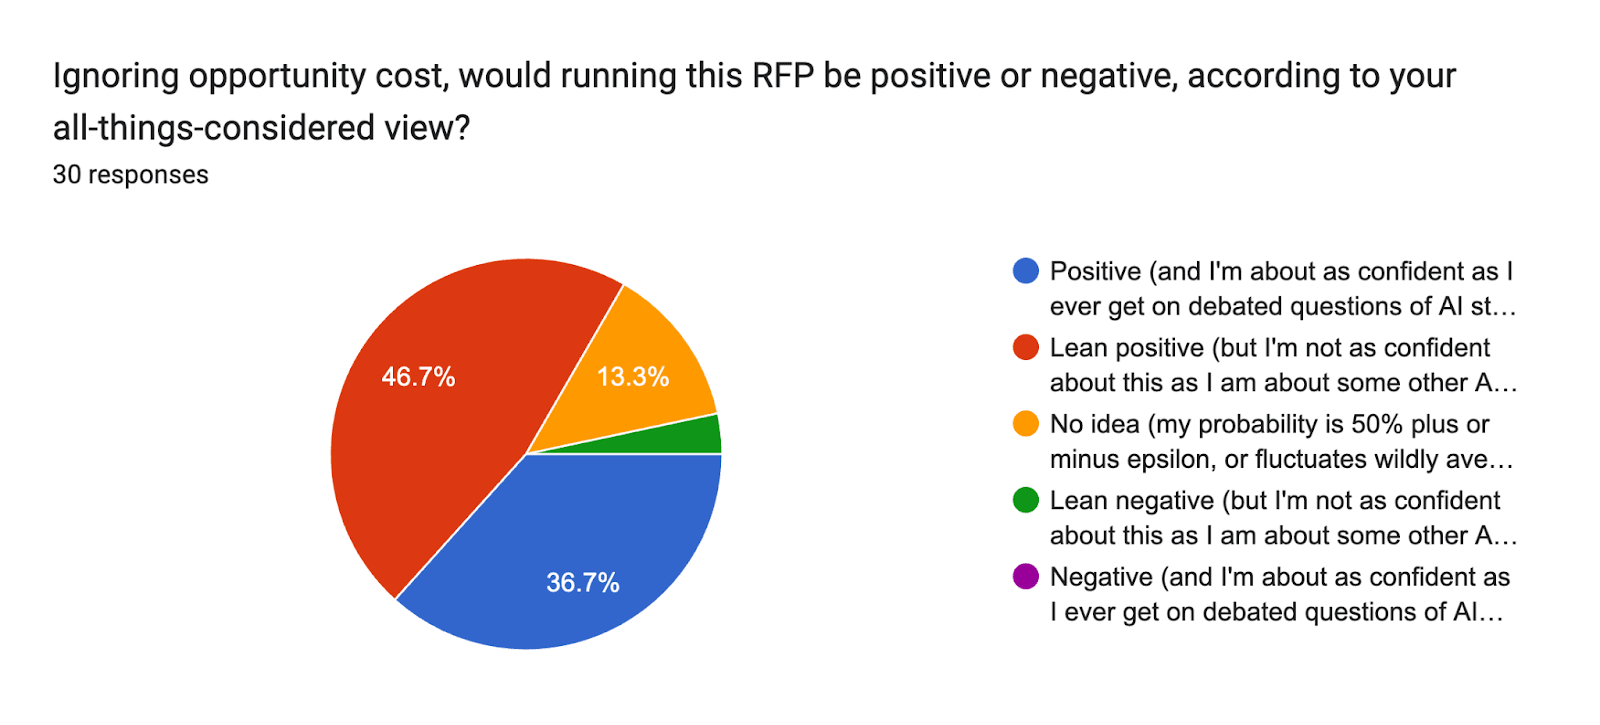 Forms response chart. Question title: Ignoring opportunity cost, would running this RFP be positive or negative, according to your all-things-considered view?. Number of responses: 30 responses.